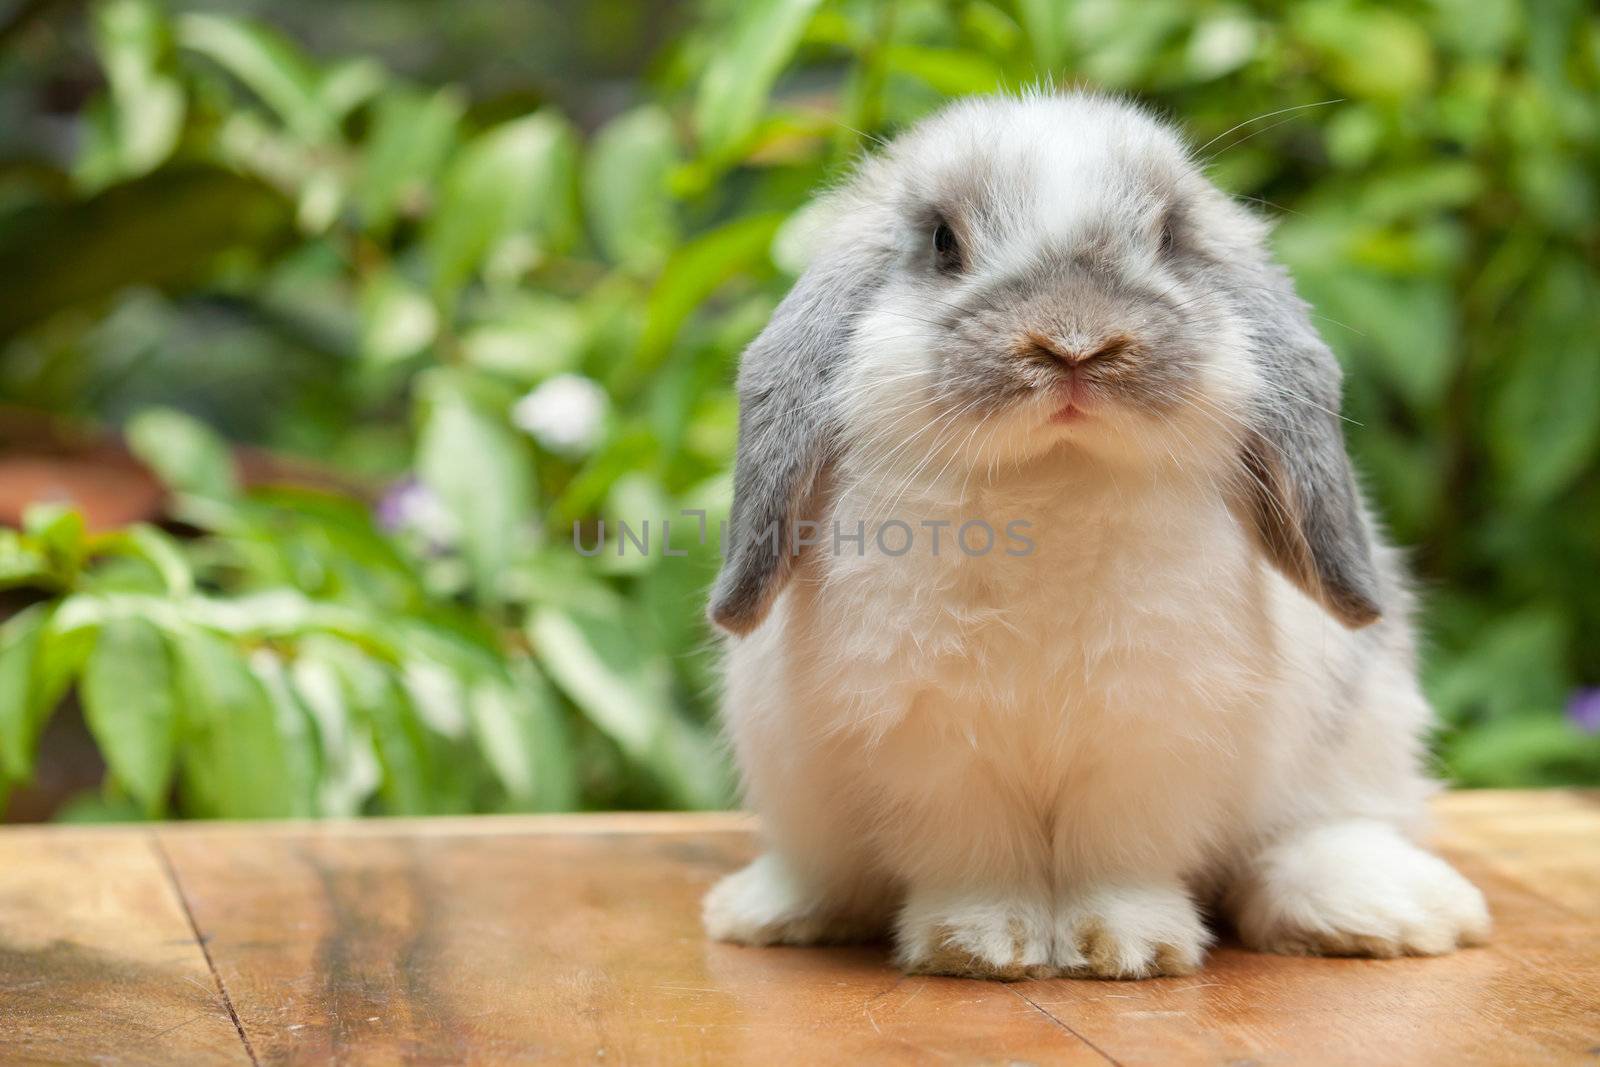 Cute holland lop rabbit standing at outdoor